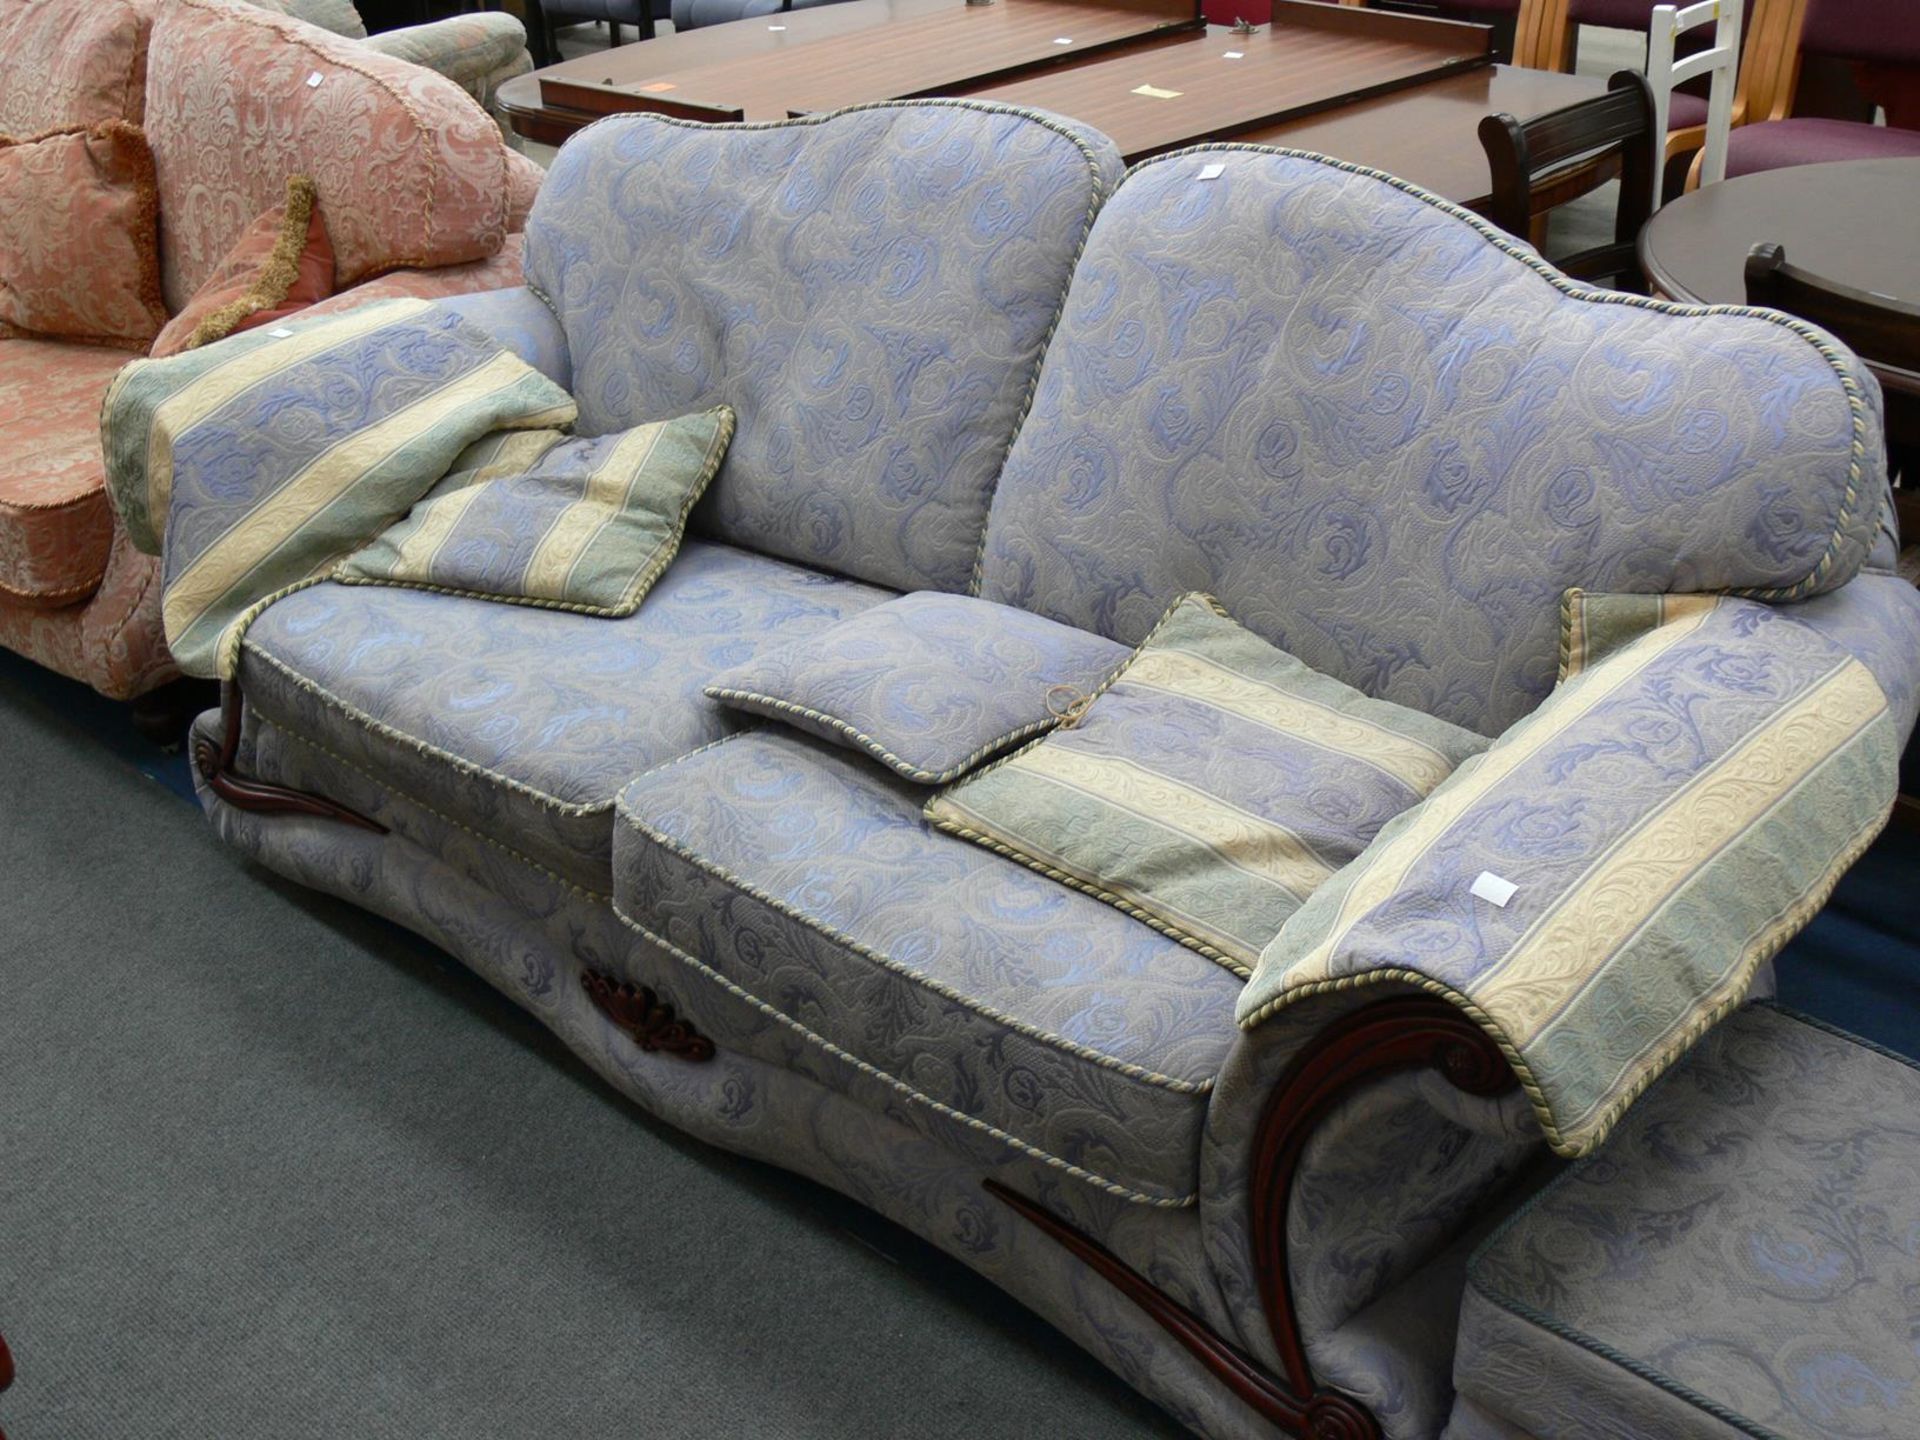 A Pale Blue Two Seat Settee with matching Pouffee (2) (est £20-£40)